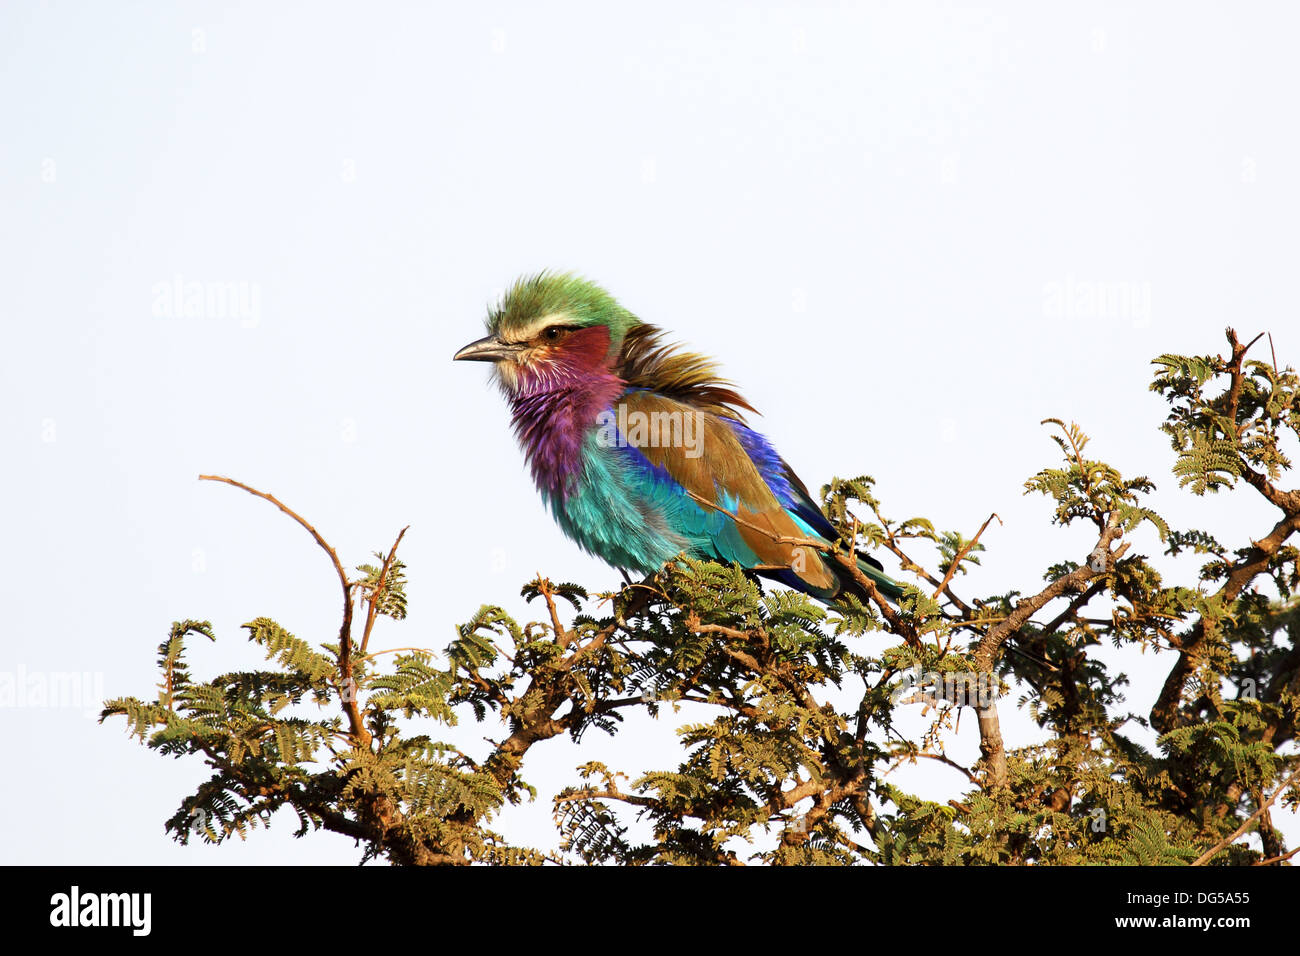 A Lilac-breasted Roller (Coracias caudatus) perched on a tree in Serengeti National Park, Tanzania Stock Photo